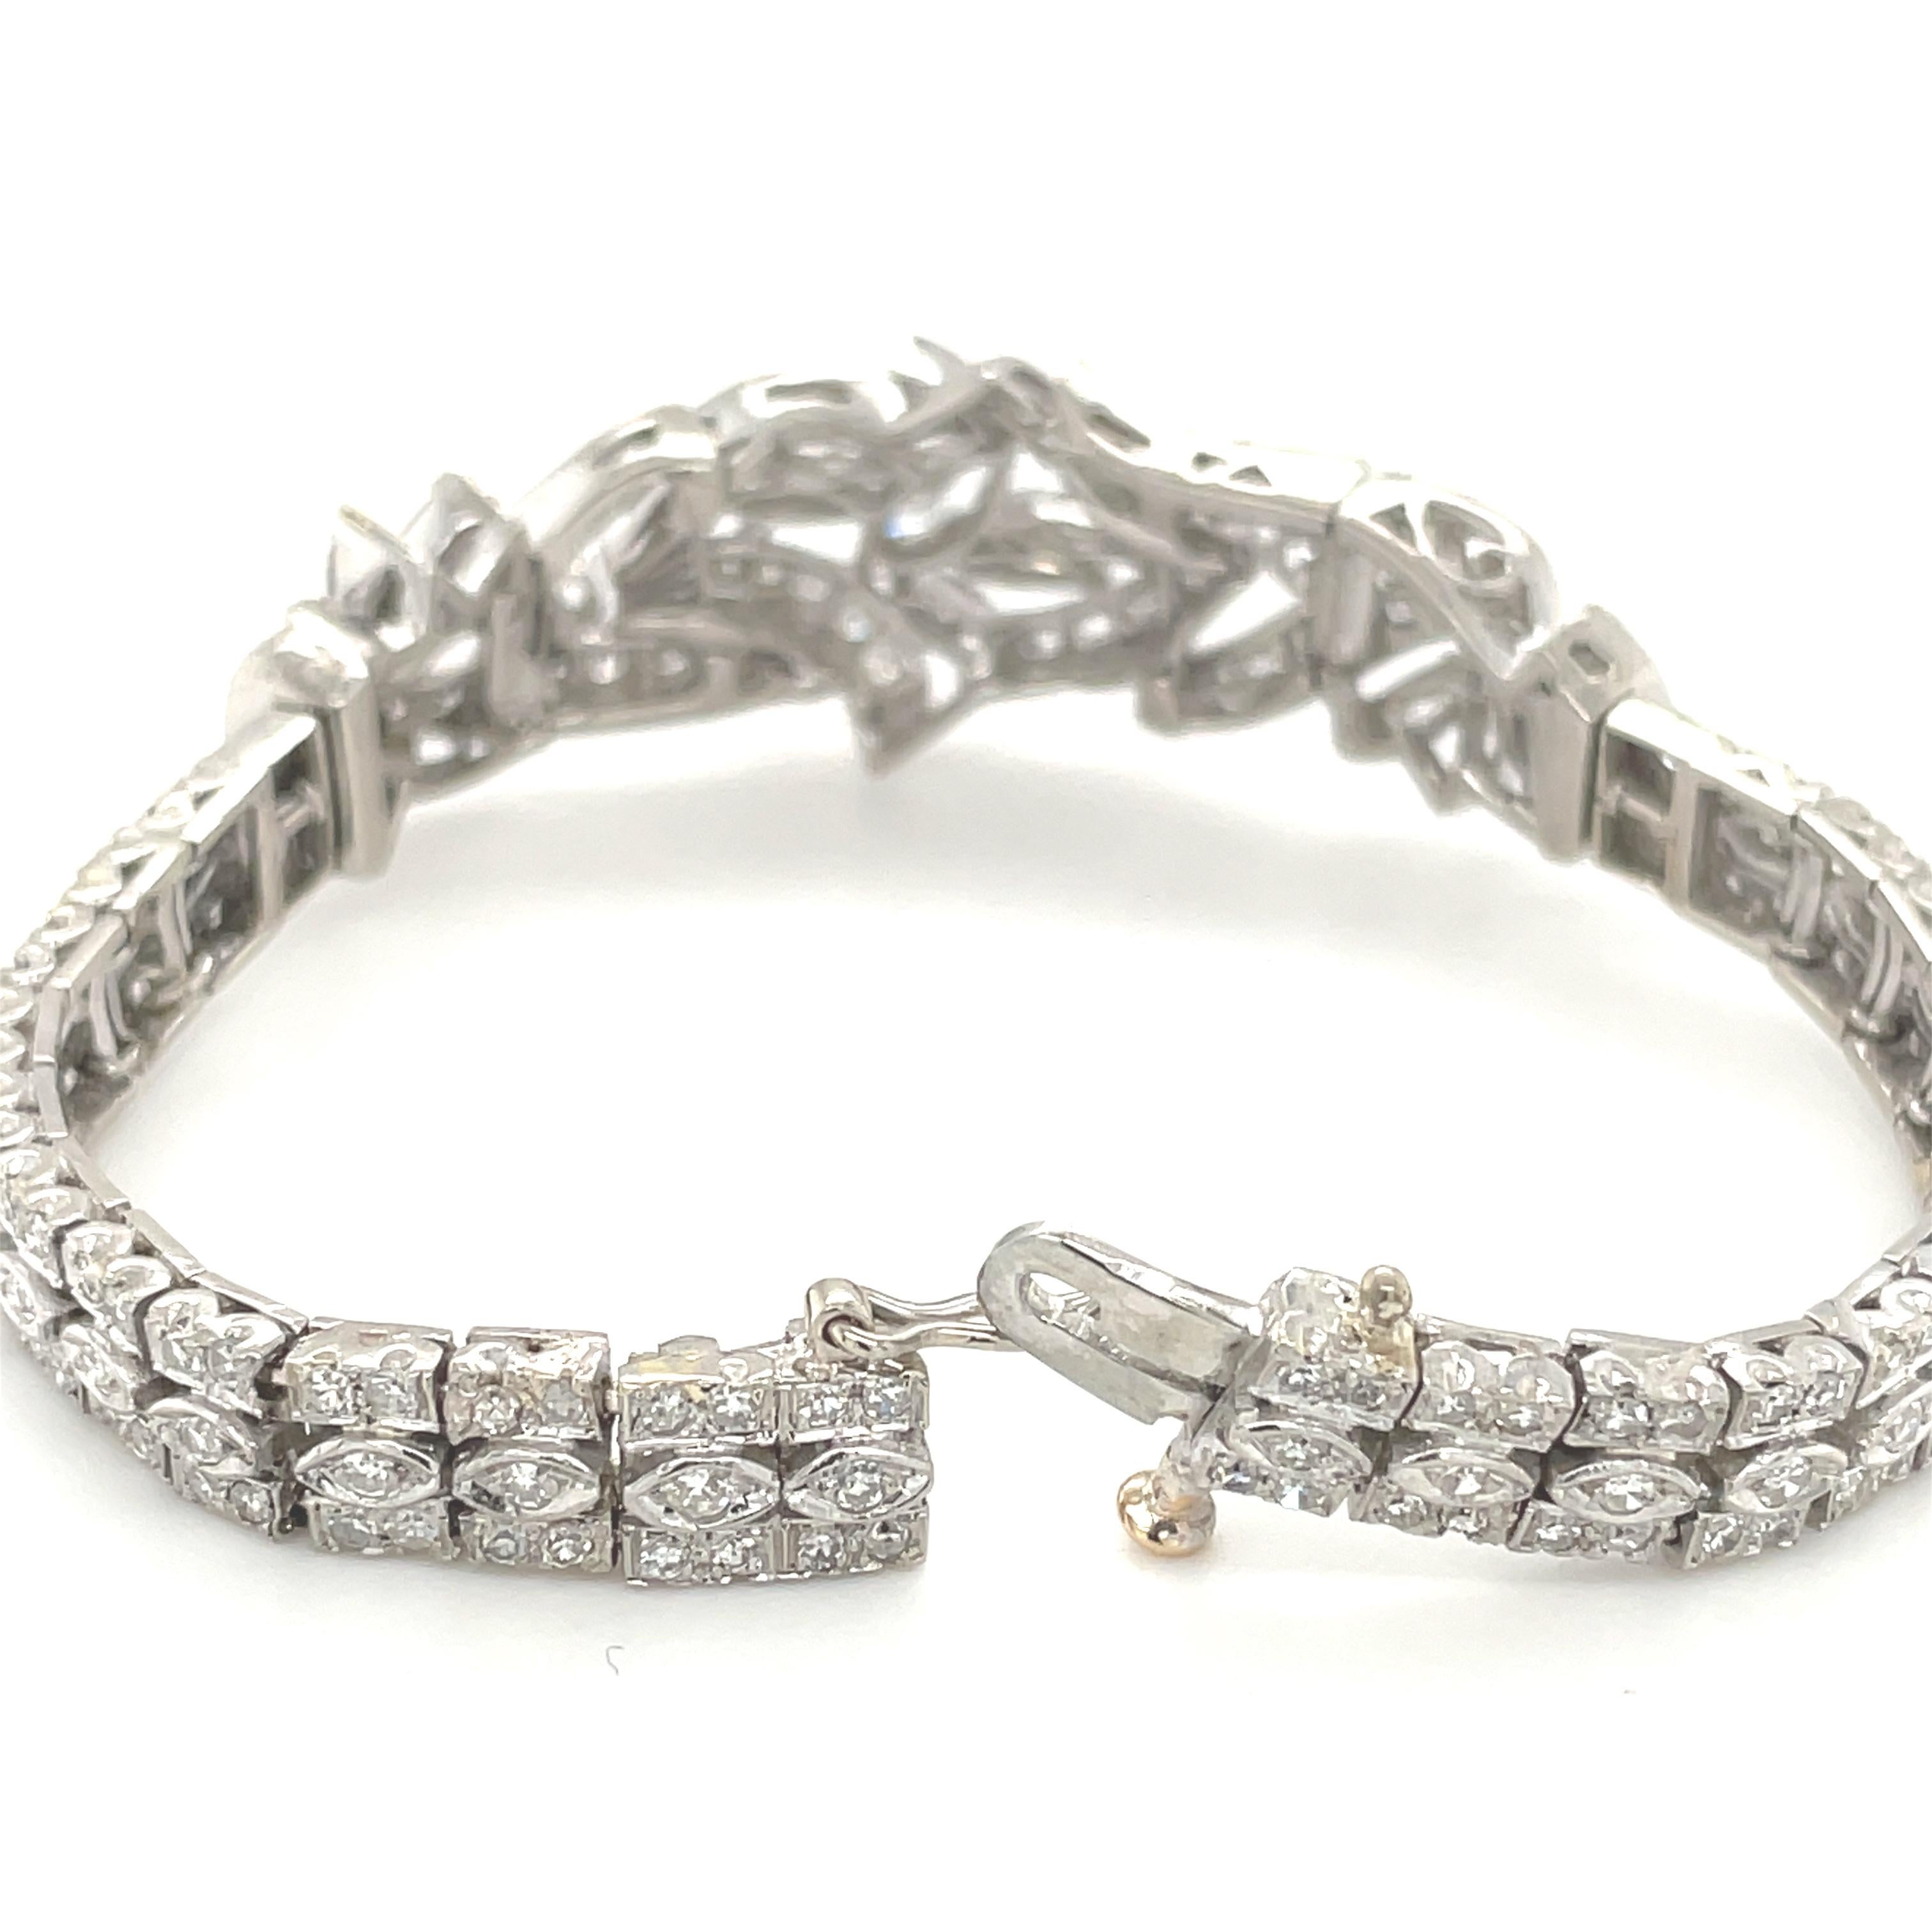 Stamped IRID PLA
Platinum Diamond Bracelet with 12.5 CTW Diamonds and this bracelet is 7 inches 